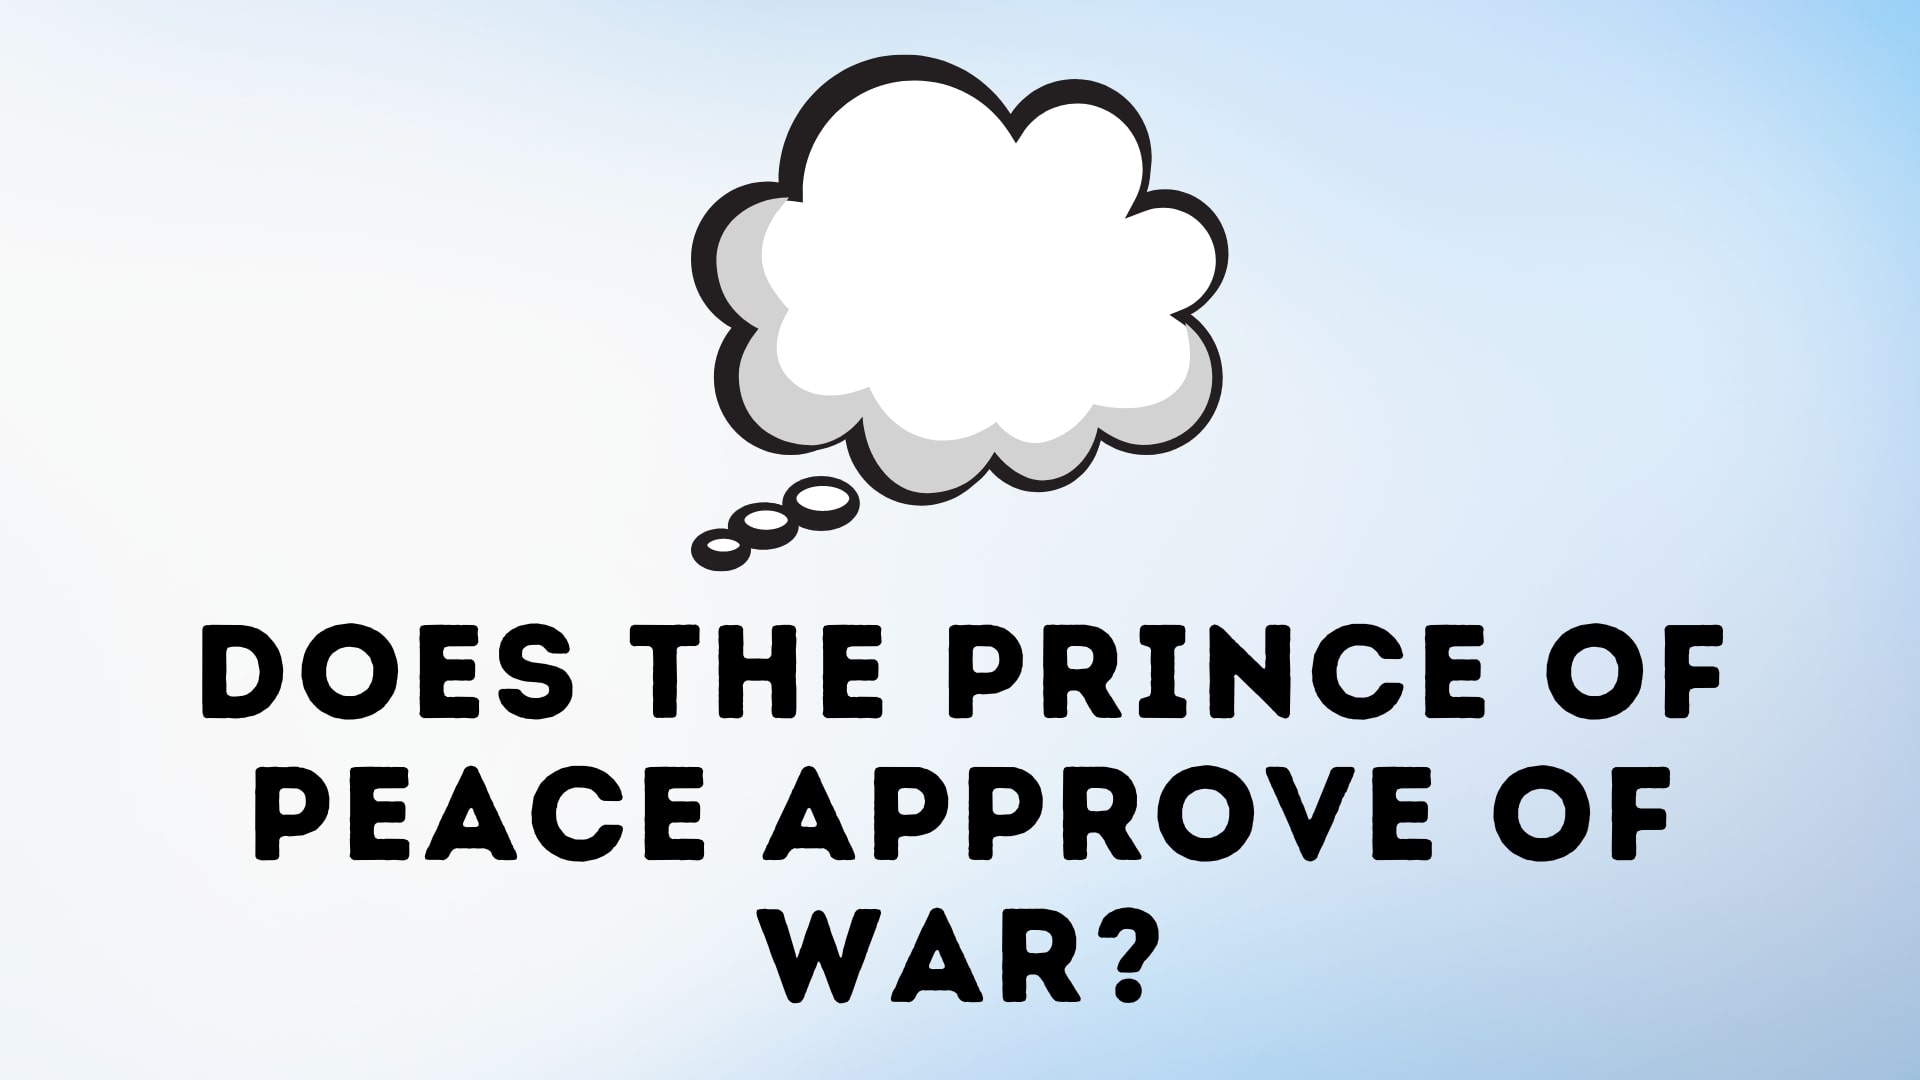 Does the Prince of Peace Approve of War?